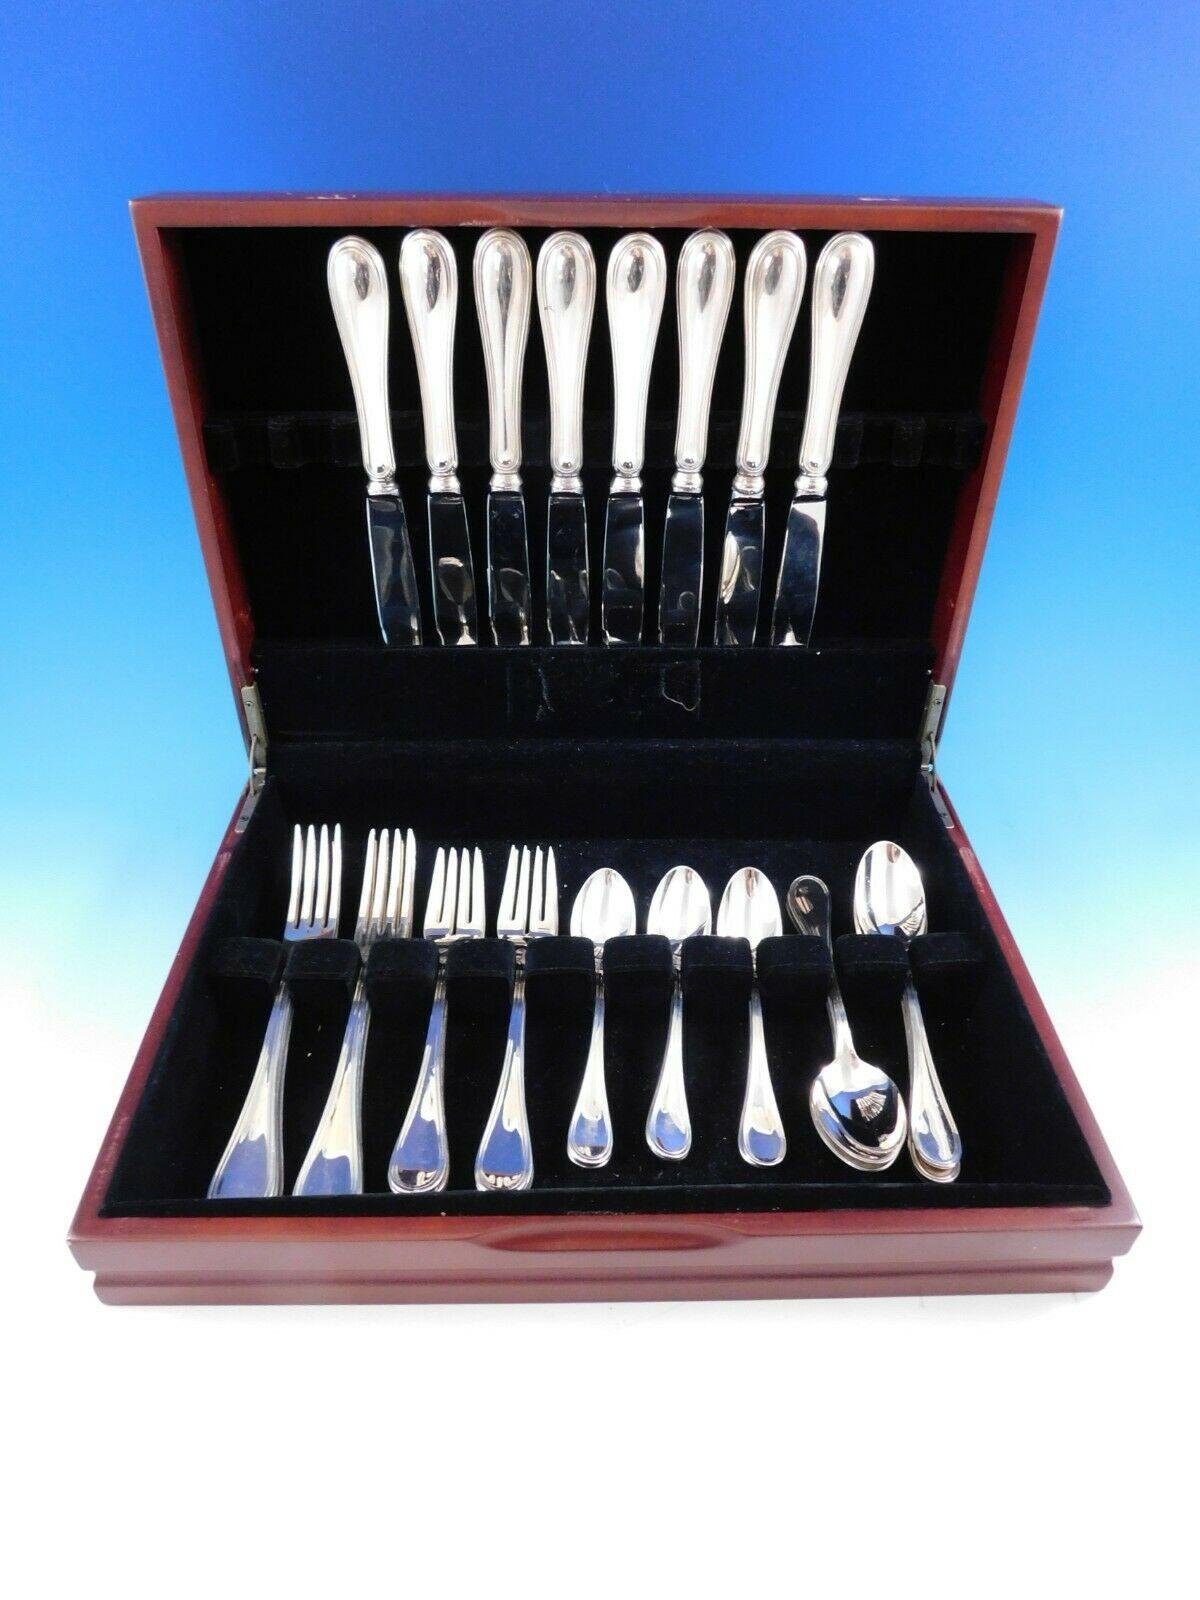 Continental size Giorgio by Wallace Italy sterling silver flatware set, 40 pieces. This set includes:

8 continental size knives, 9 7/8